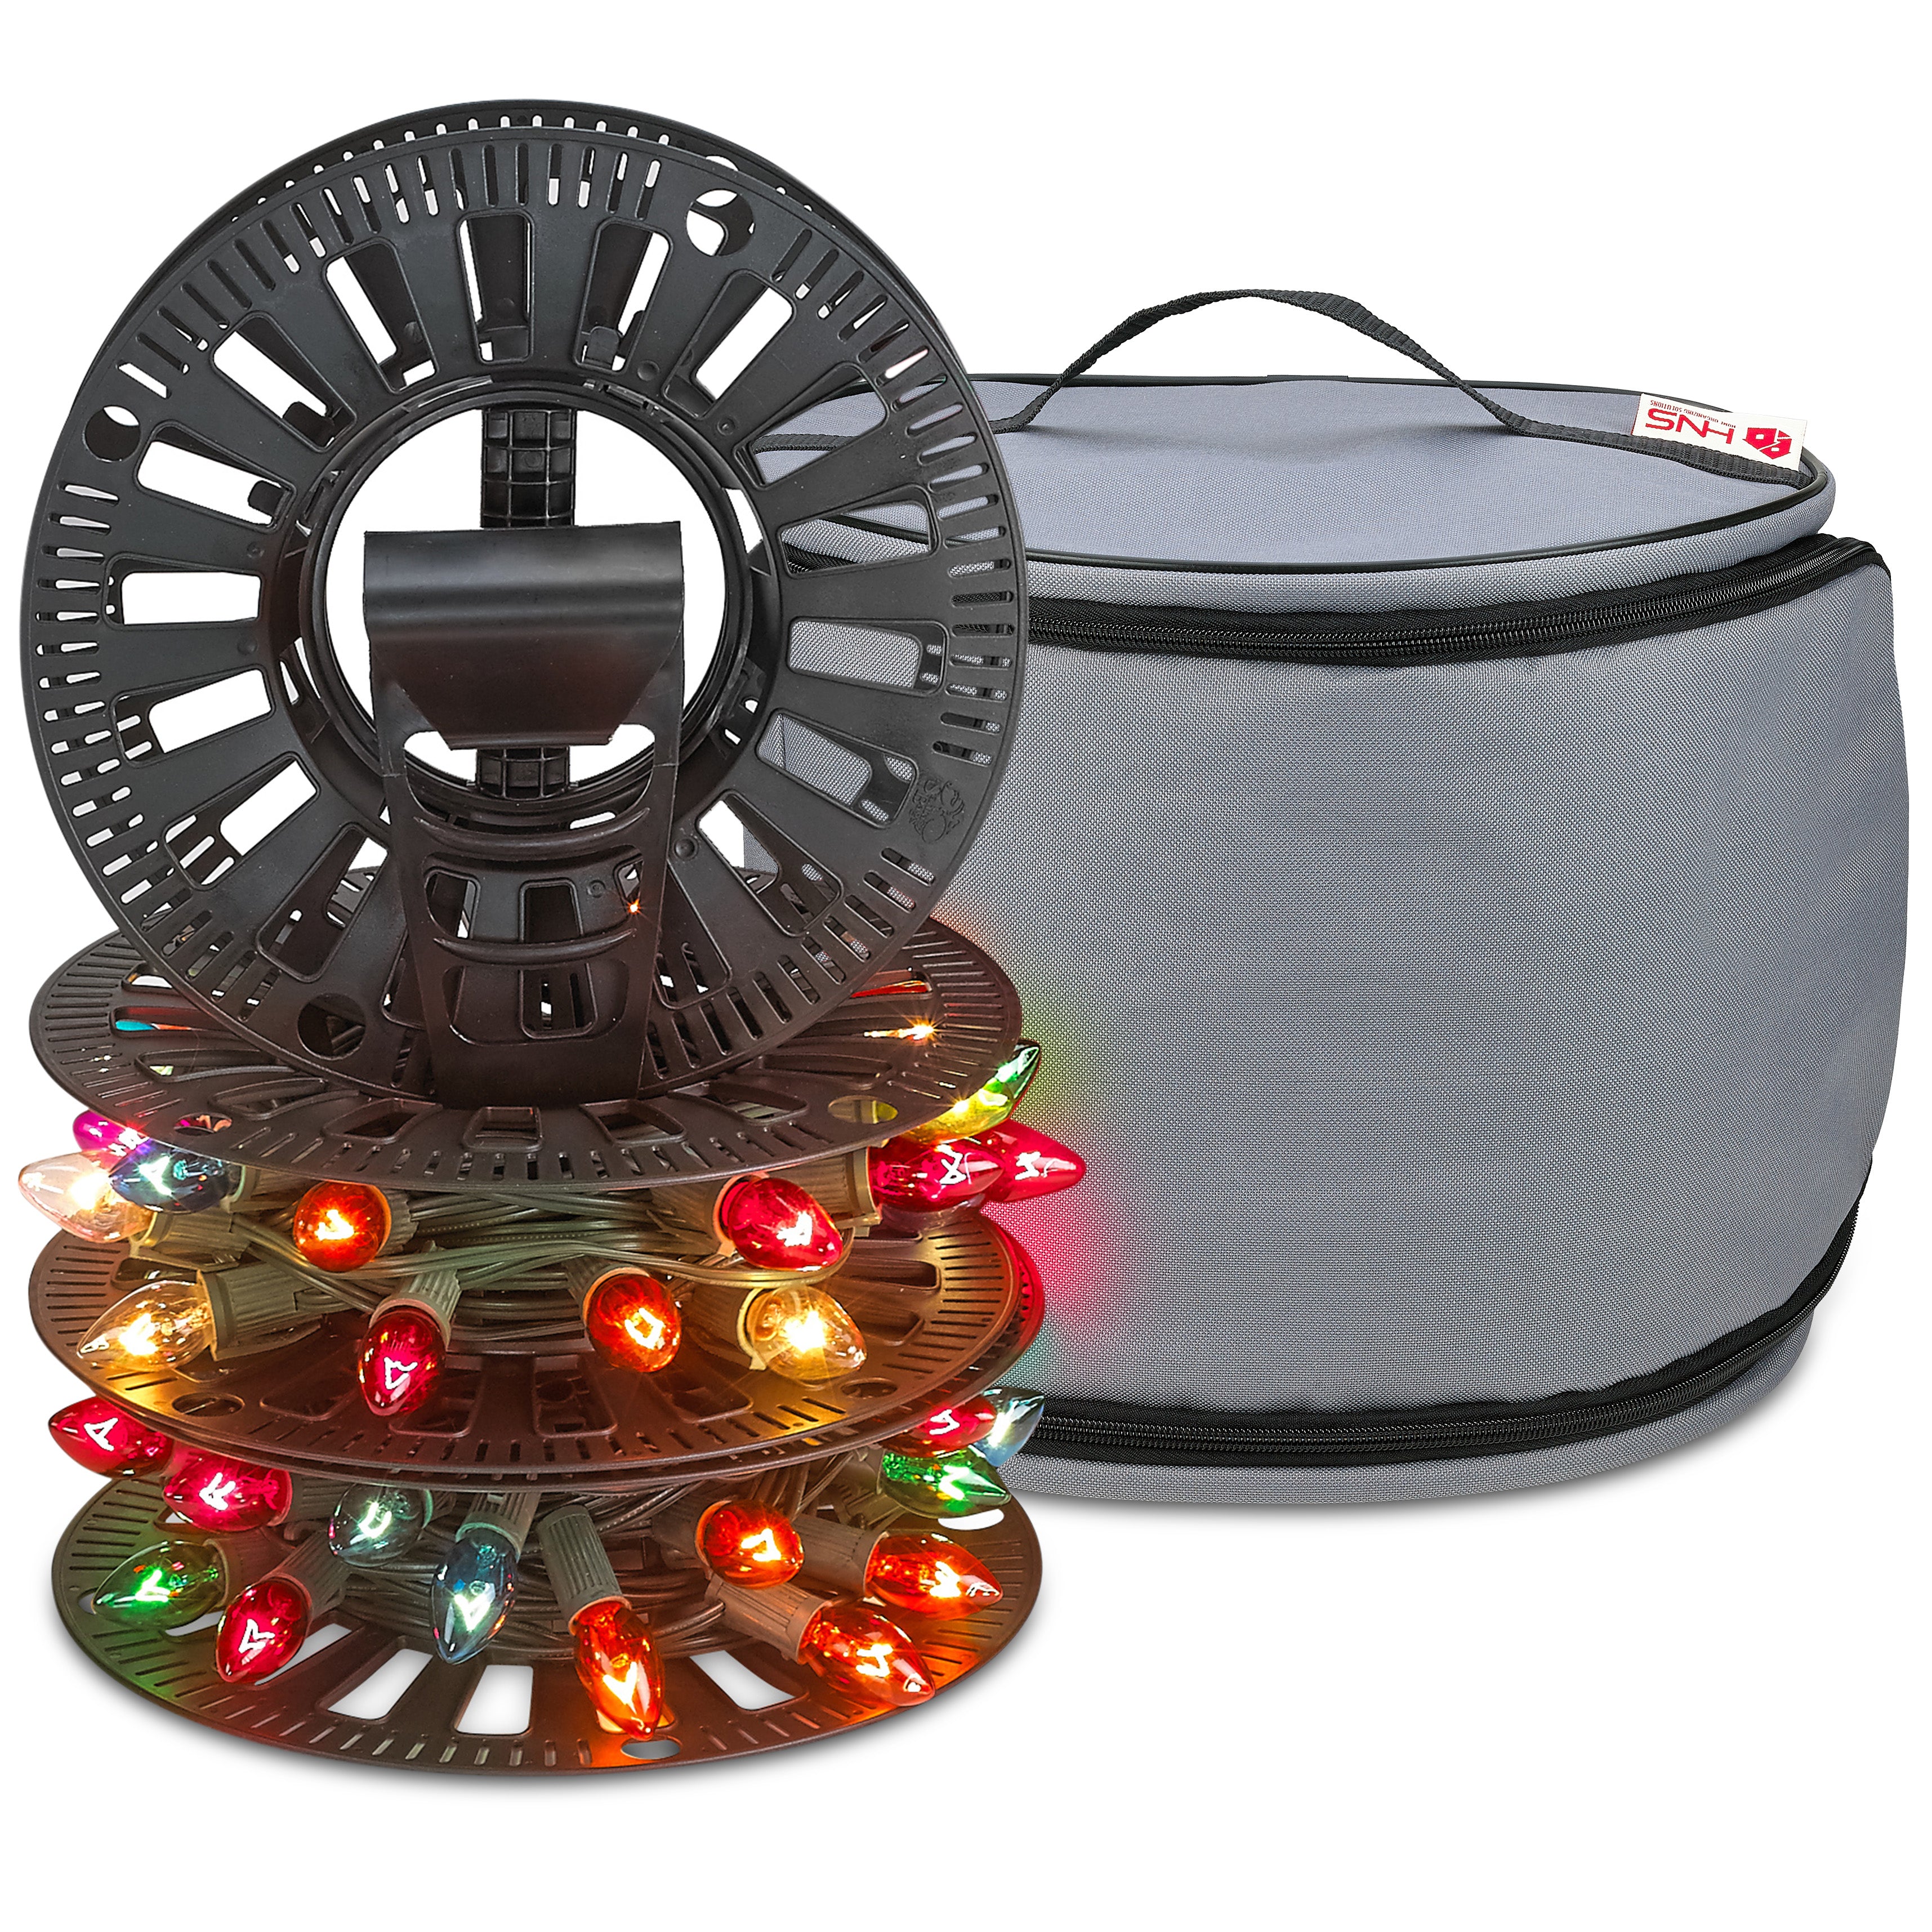 Premium Christmas Light Storage Bag – Heavy Duty Tear Proof 600D/Inside PVC Material with Reinforced Handles - With 3 Reels Stores up to 375 Ft of Mini Christmas Tree Lights & Extension Cords